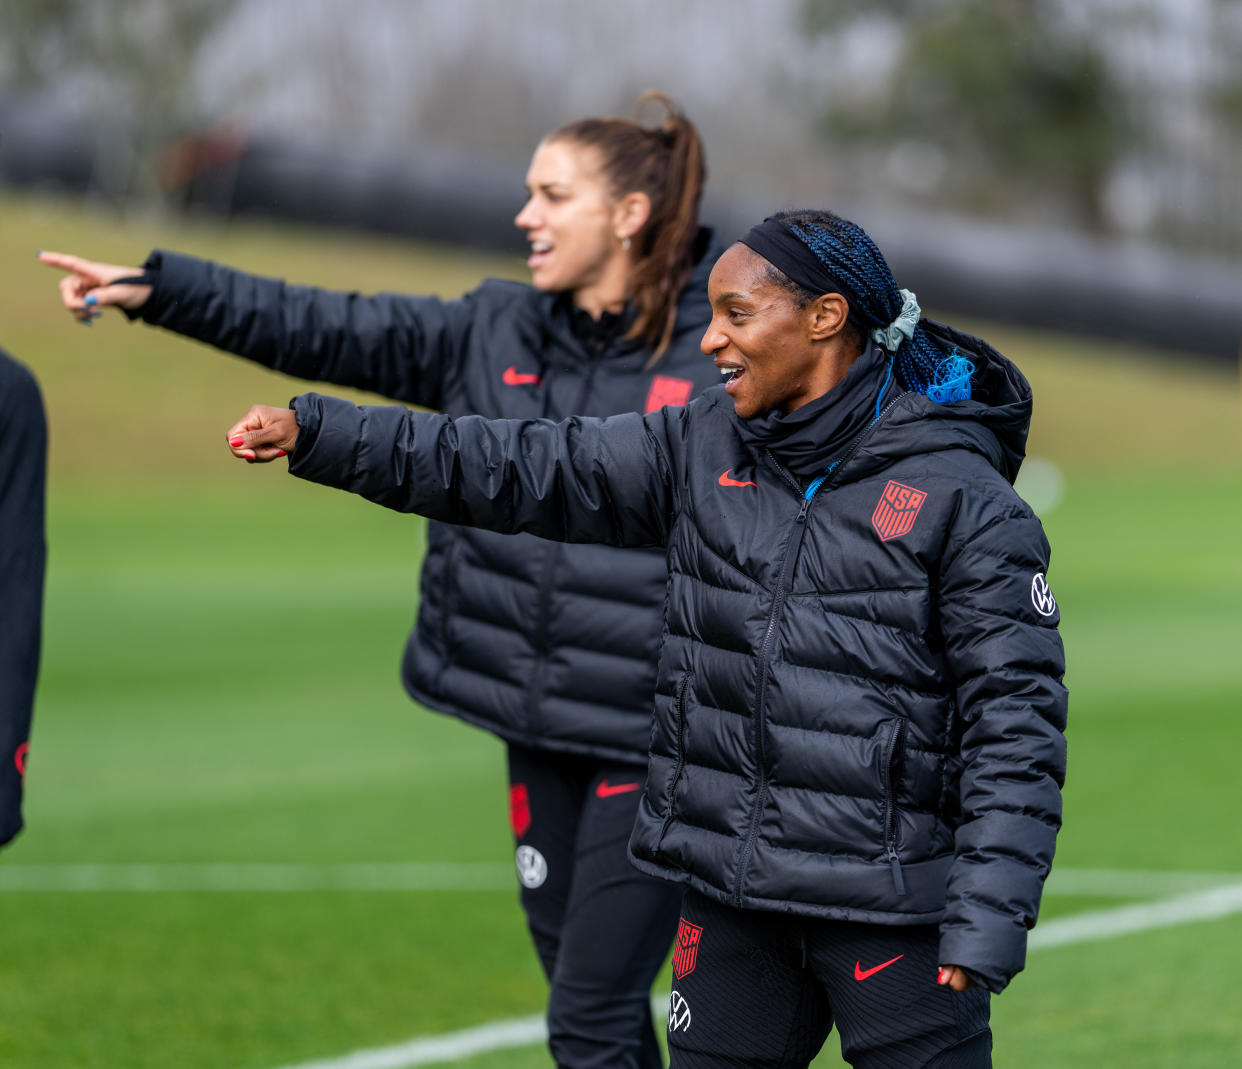 AUCKLAND, NEW ZEALAND - JULY 25: Alex Morgan #13 and Crystal Dunn #19 of the United States warm up during USWNT Training at Bay City Park on July 25, 2023 in Auckland, New Zealand. (Photo by Brad Smith/USSF/Getty Images for USSF).